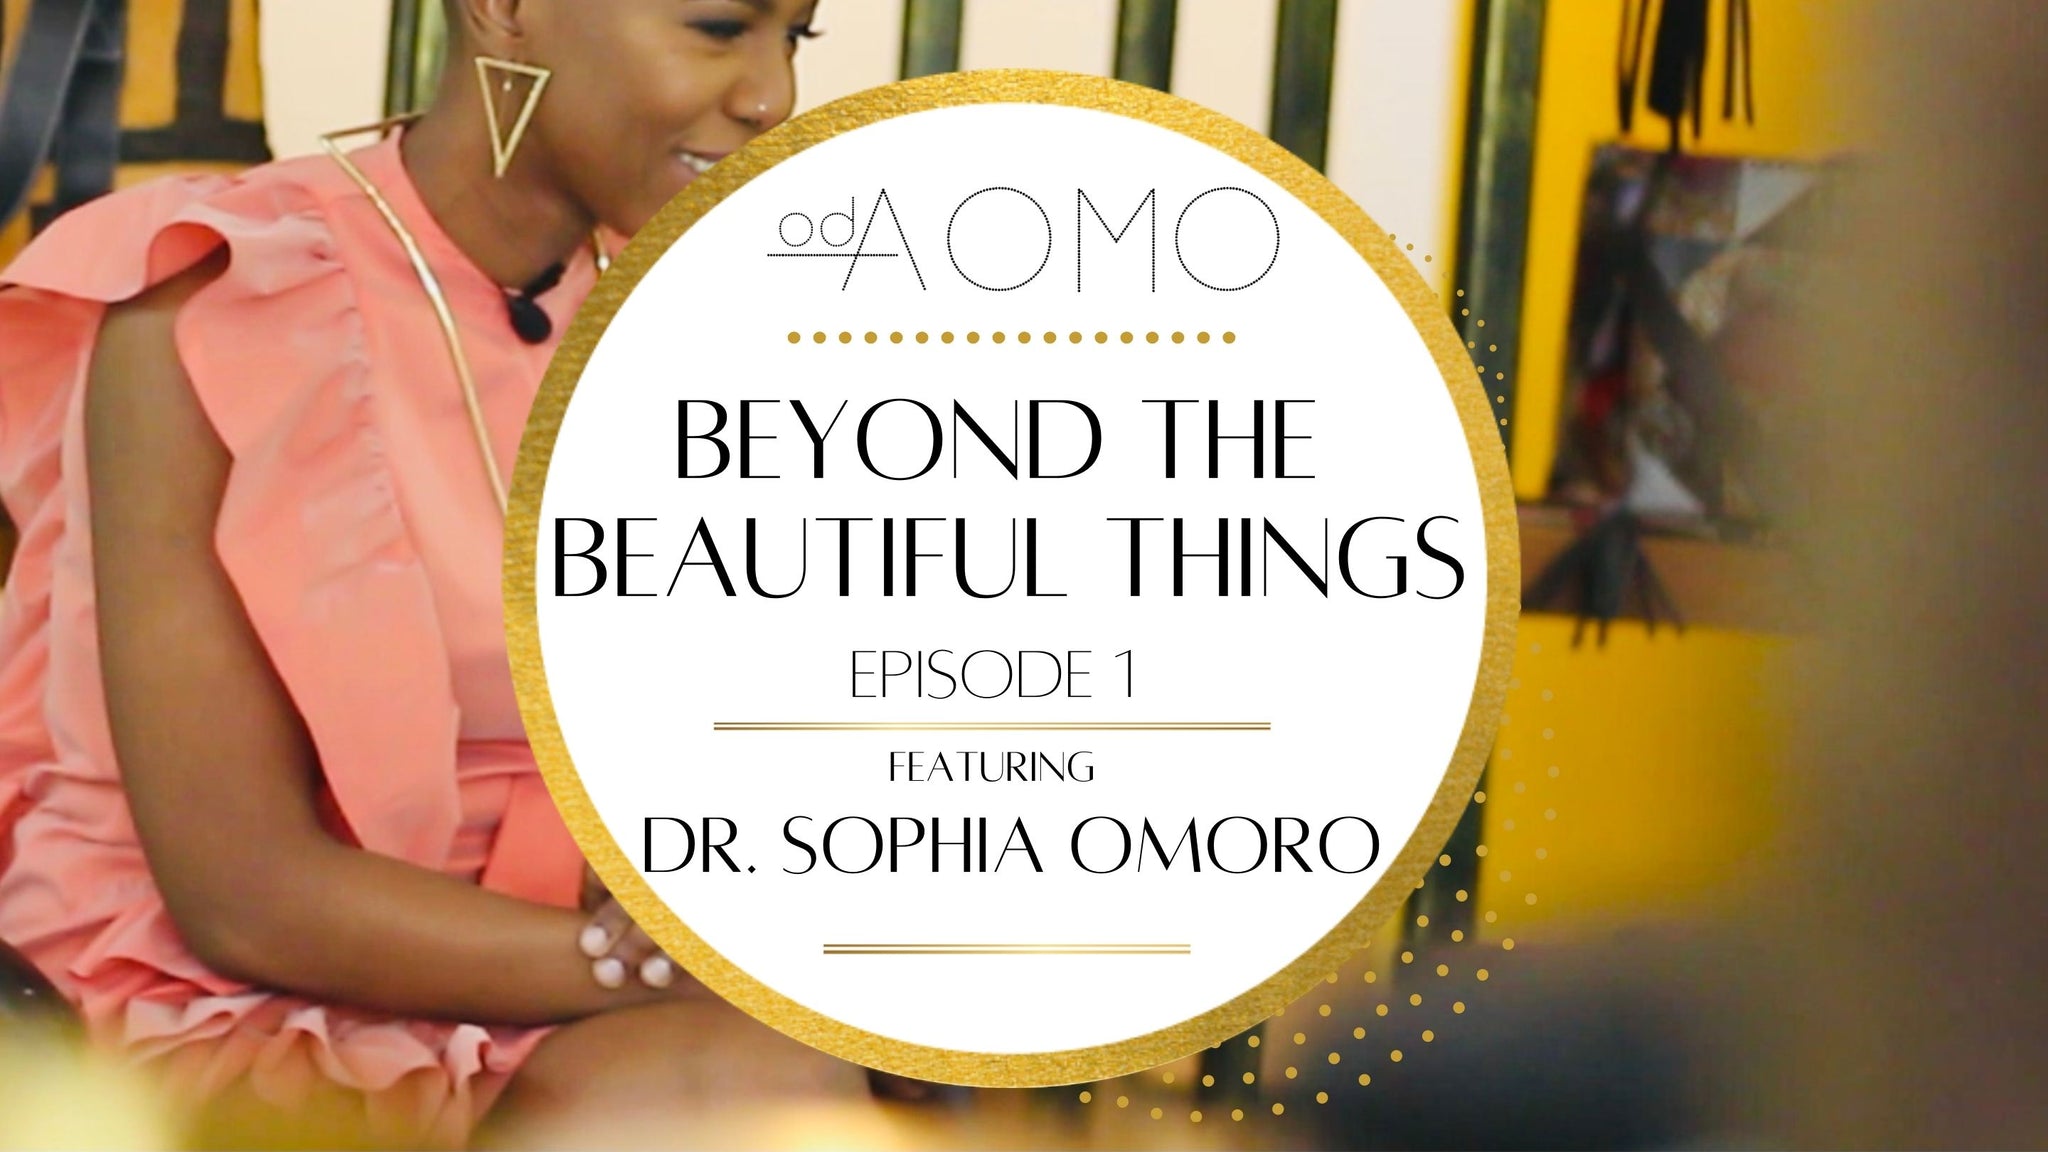 In this premier episode of our odConversation series we are introduced to Dr. Sophia Omoro; Owner/Designer at odAOMO and Producer of "Beyond the Beautiful Things".